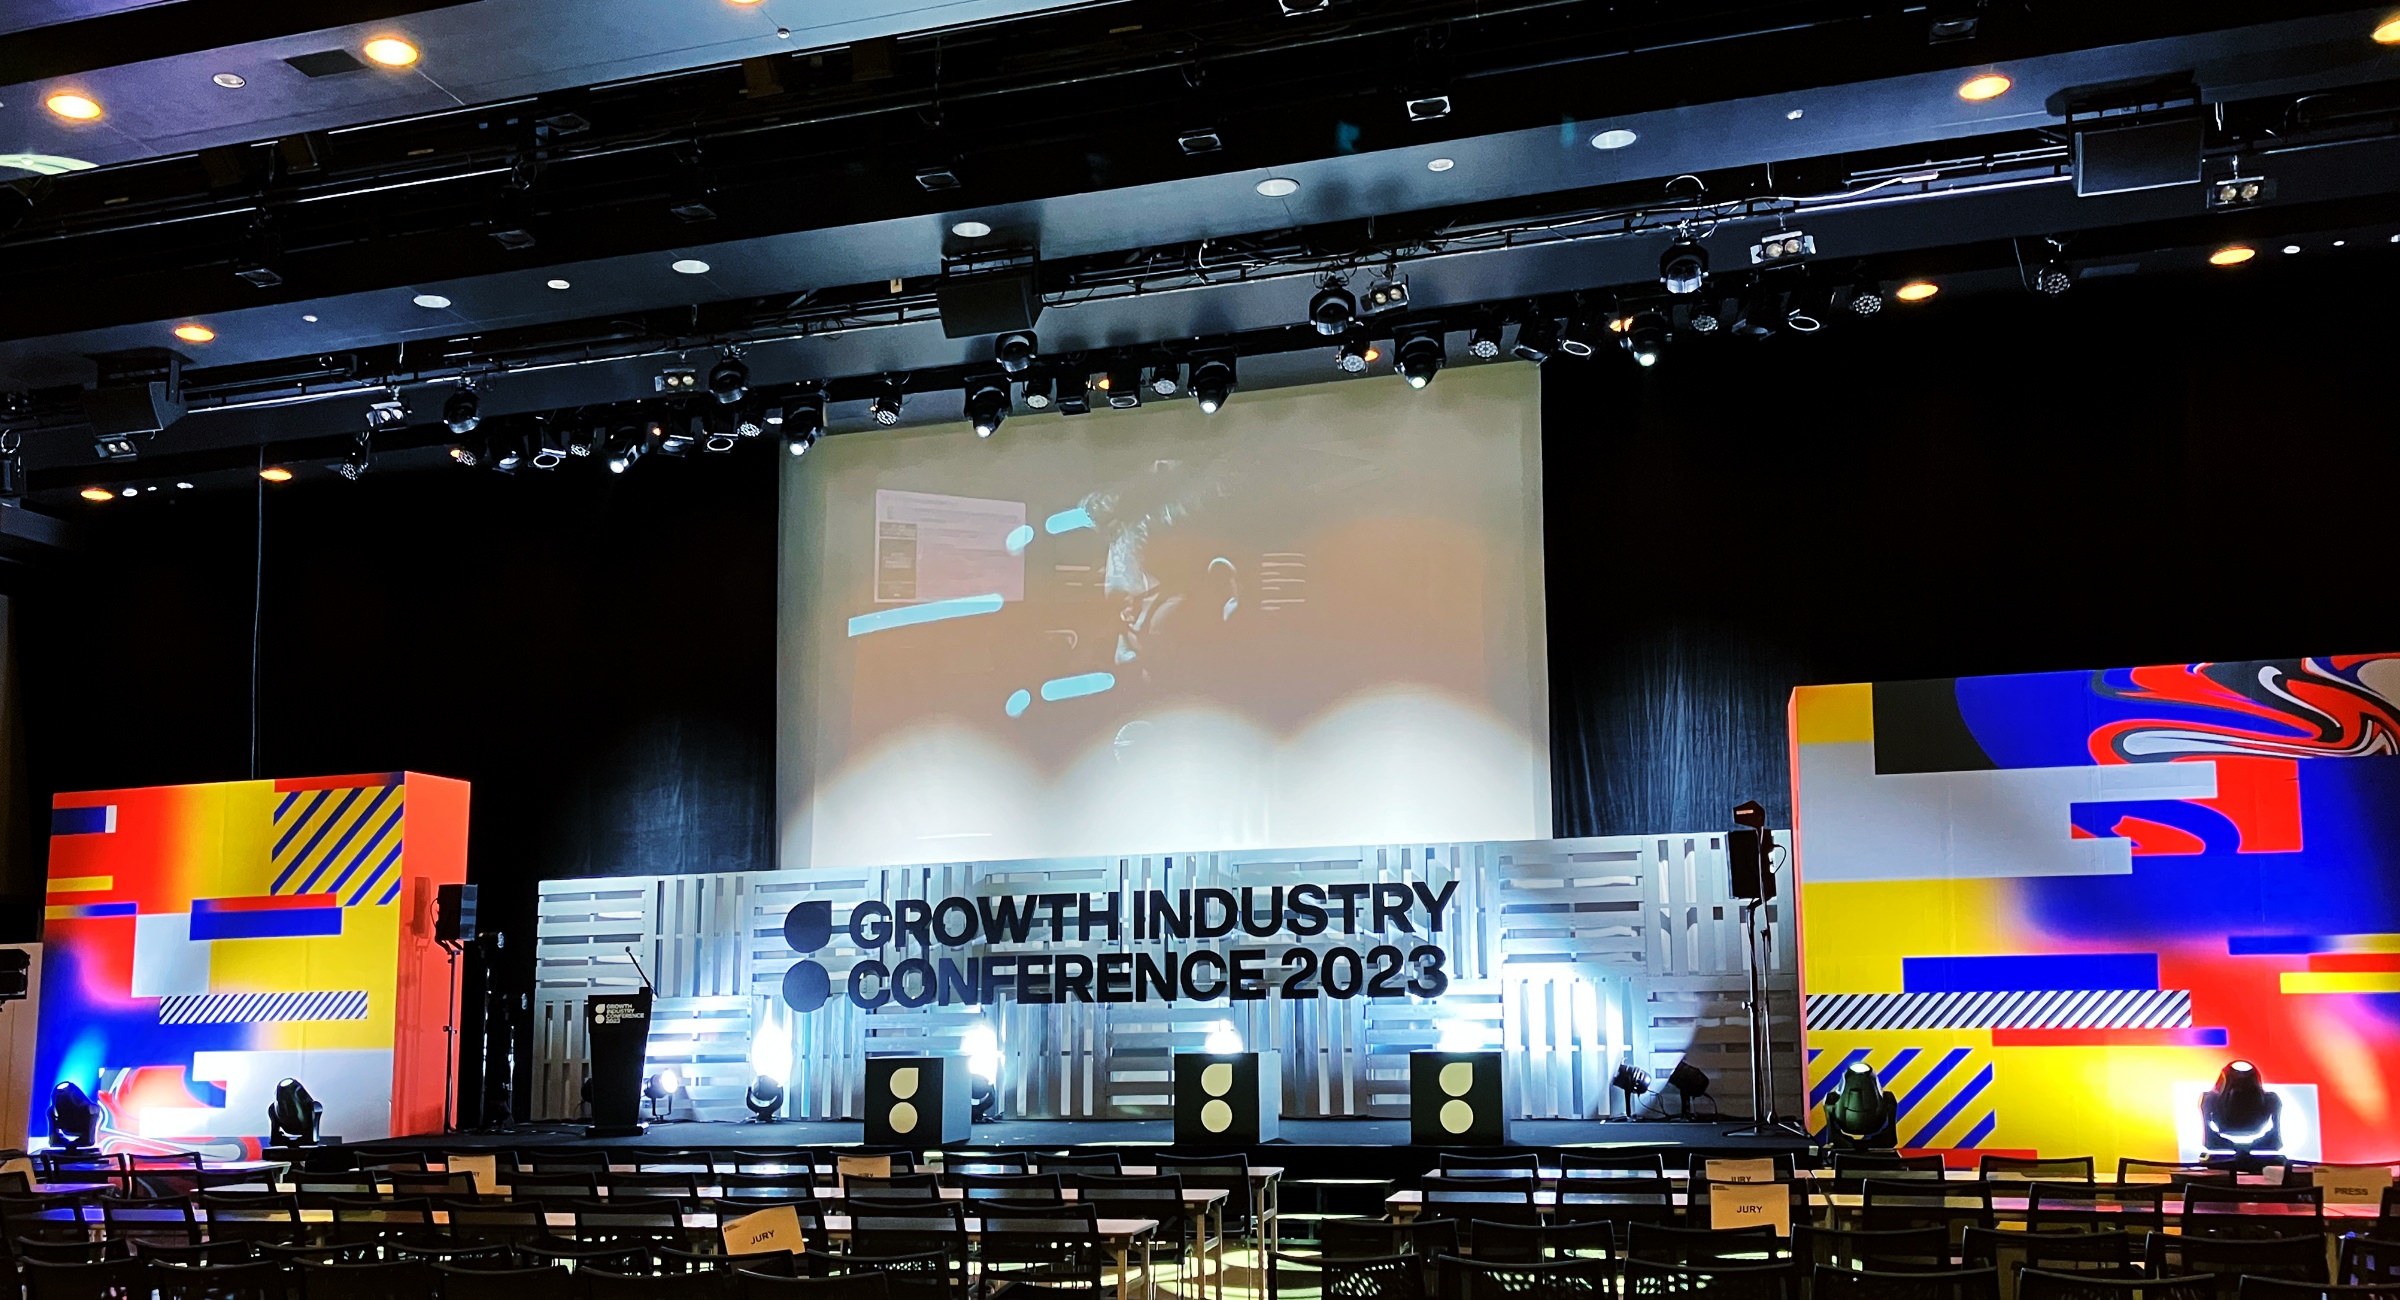 Growth Industry Conference2023